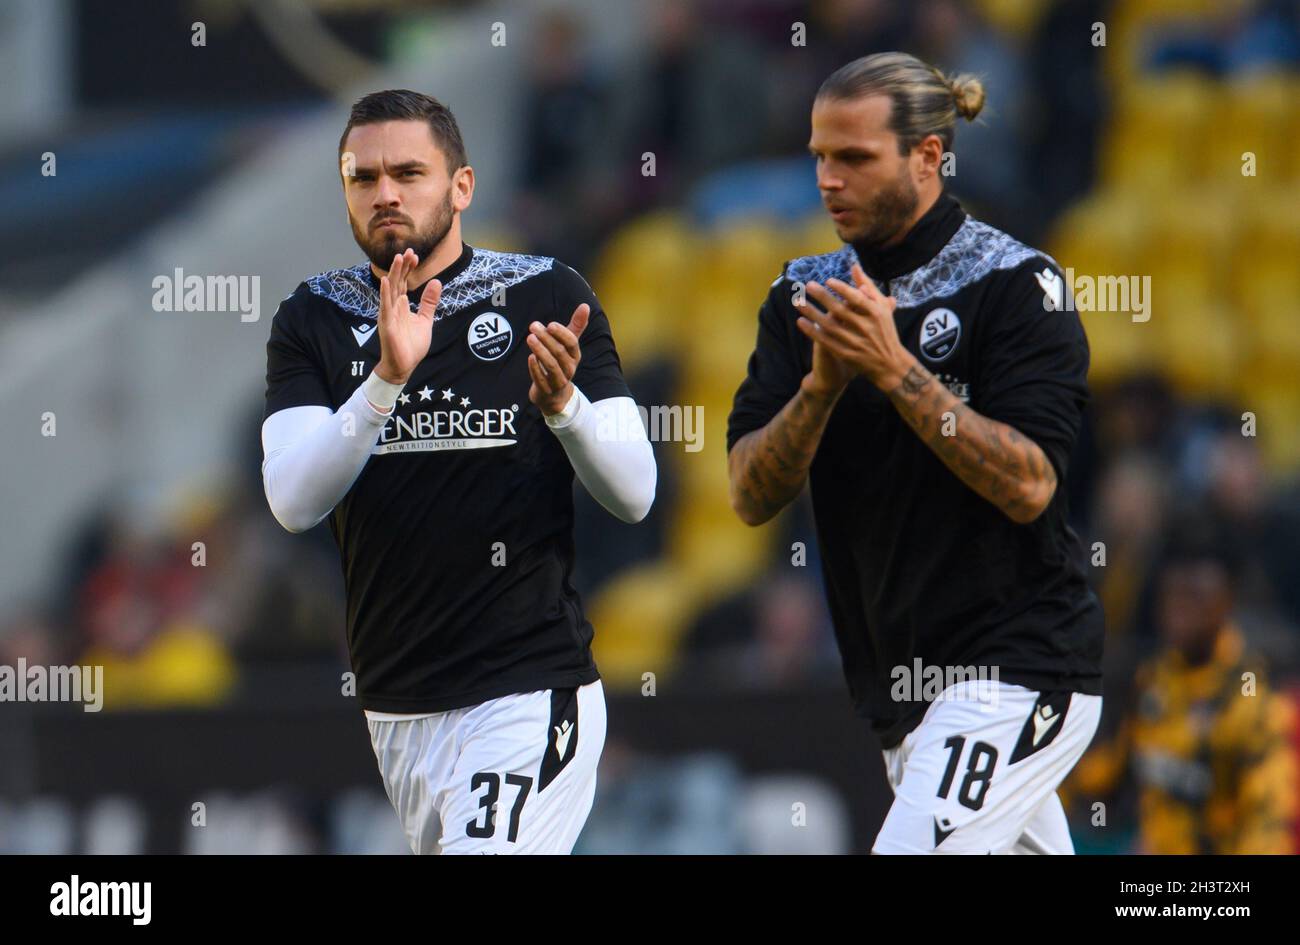 Dresden, Germany. 30th Oct, 2021. Football: 2. Bundesliga, SG Dynamo Dresden - SV Sandhausen, Matchday 12, at Rudolf-Harbig-Stadion. Sandhausen's Pascal Testroet (l) and Dennis Diekmeier come onto the field to warm up. Credit: Robert Michael/dpa-Zentralbild/dpa - IMPORTANT NOTE: In accordance with the regulations of the DFL Deutsche Fußball Liga and/or the DFB Deutscher Fußball-Bund, it is prohibited to use or have used photographs taken in the stadium and/or of the match in the form of sequence pictures and/or video-like photo series./dpa/Alamy Live News Stock Photo